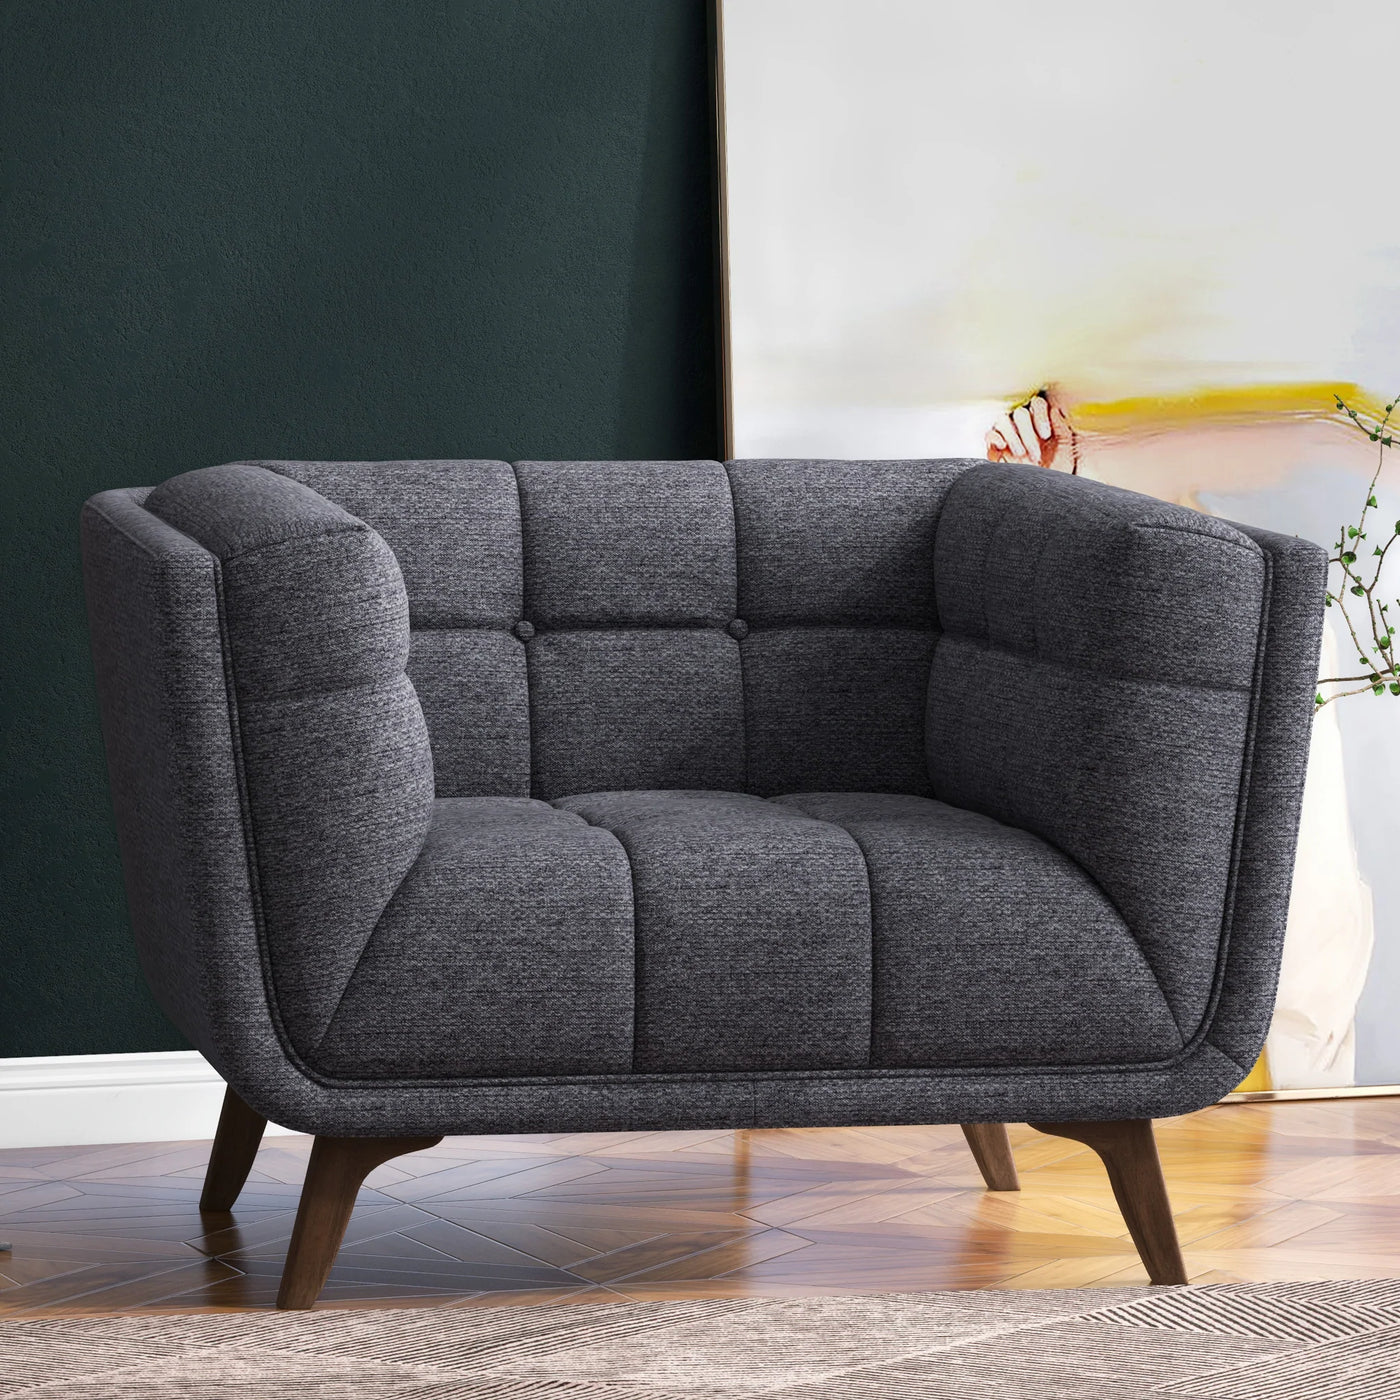 Rounded Square Modern Gray Linen Lounge Chair